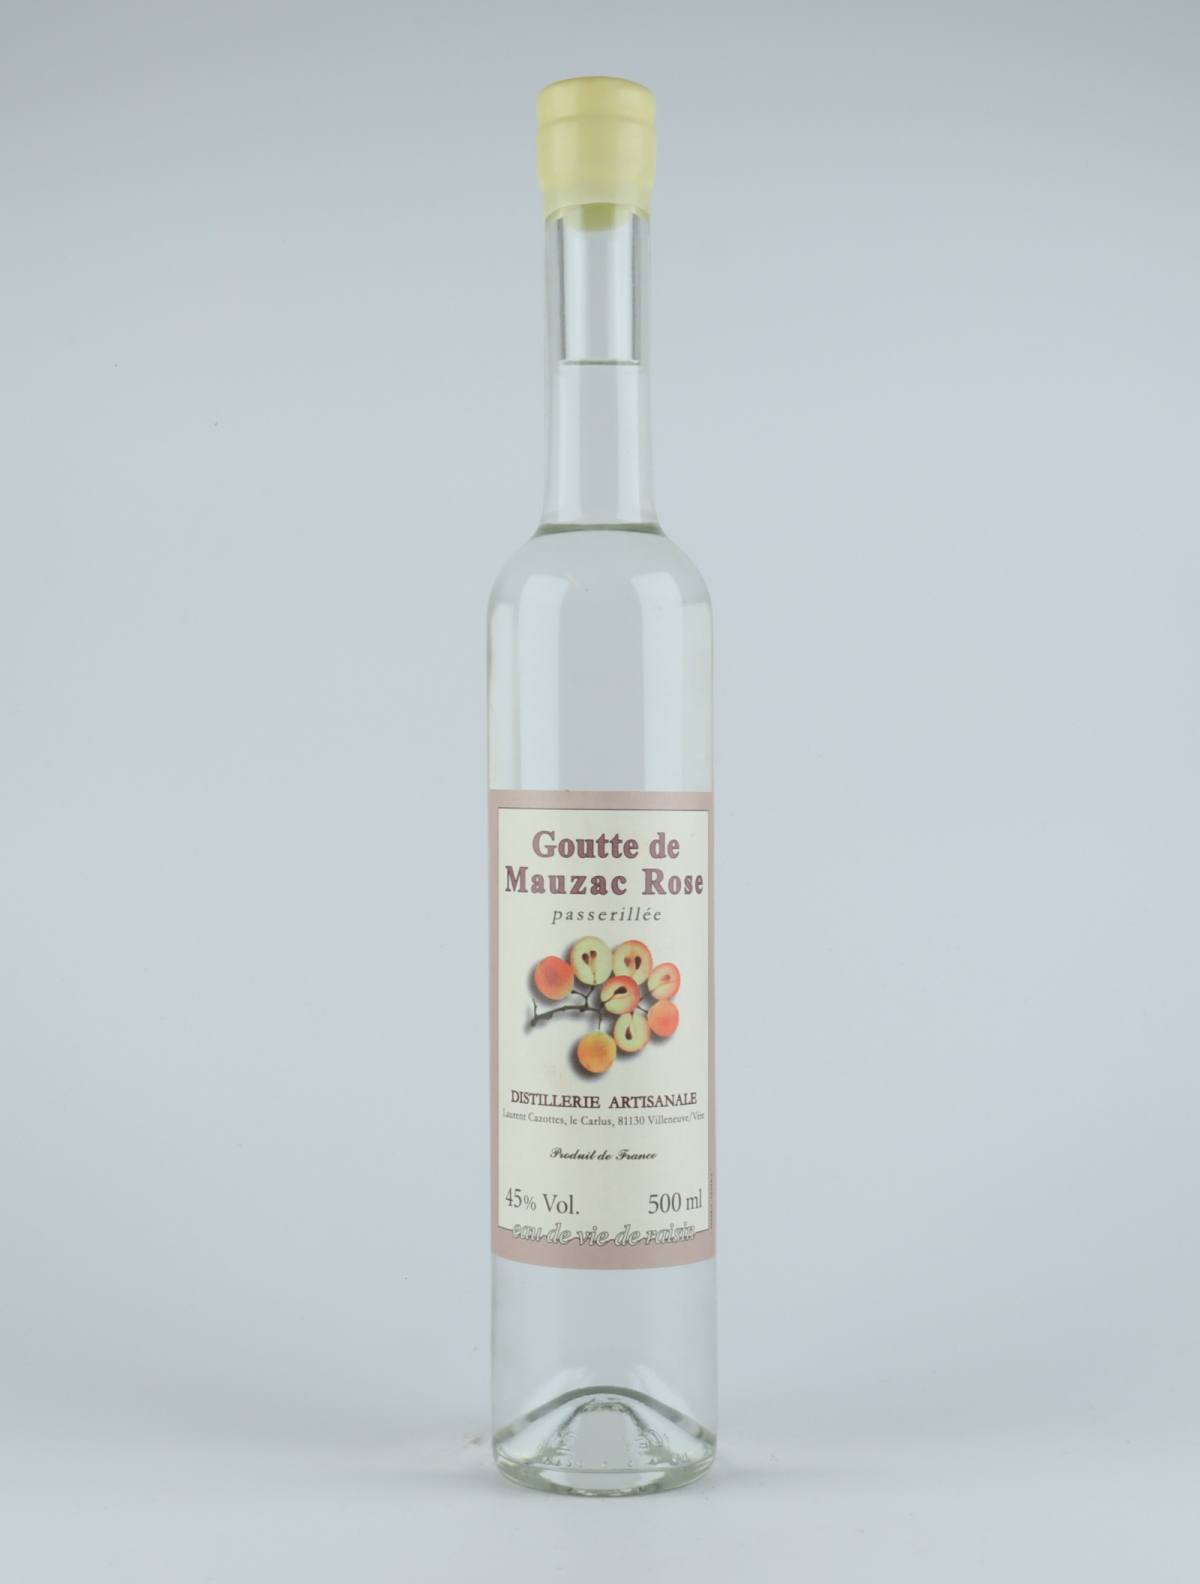 A bottle 2015 Mauzac Rose Spirits from Laurent Cazottes, Tarn in France